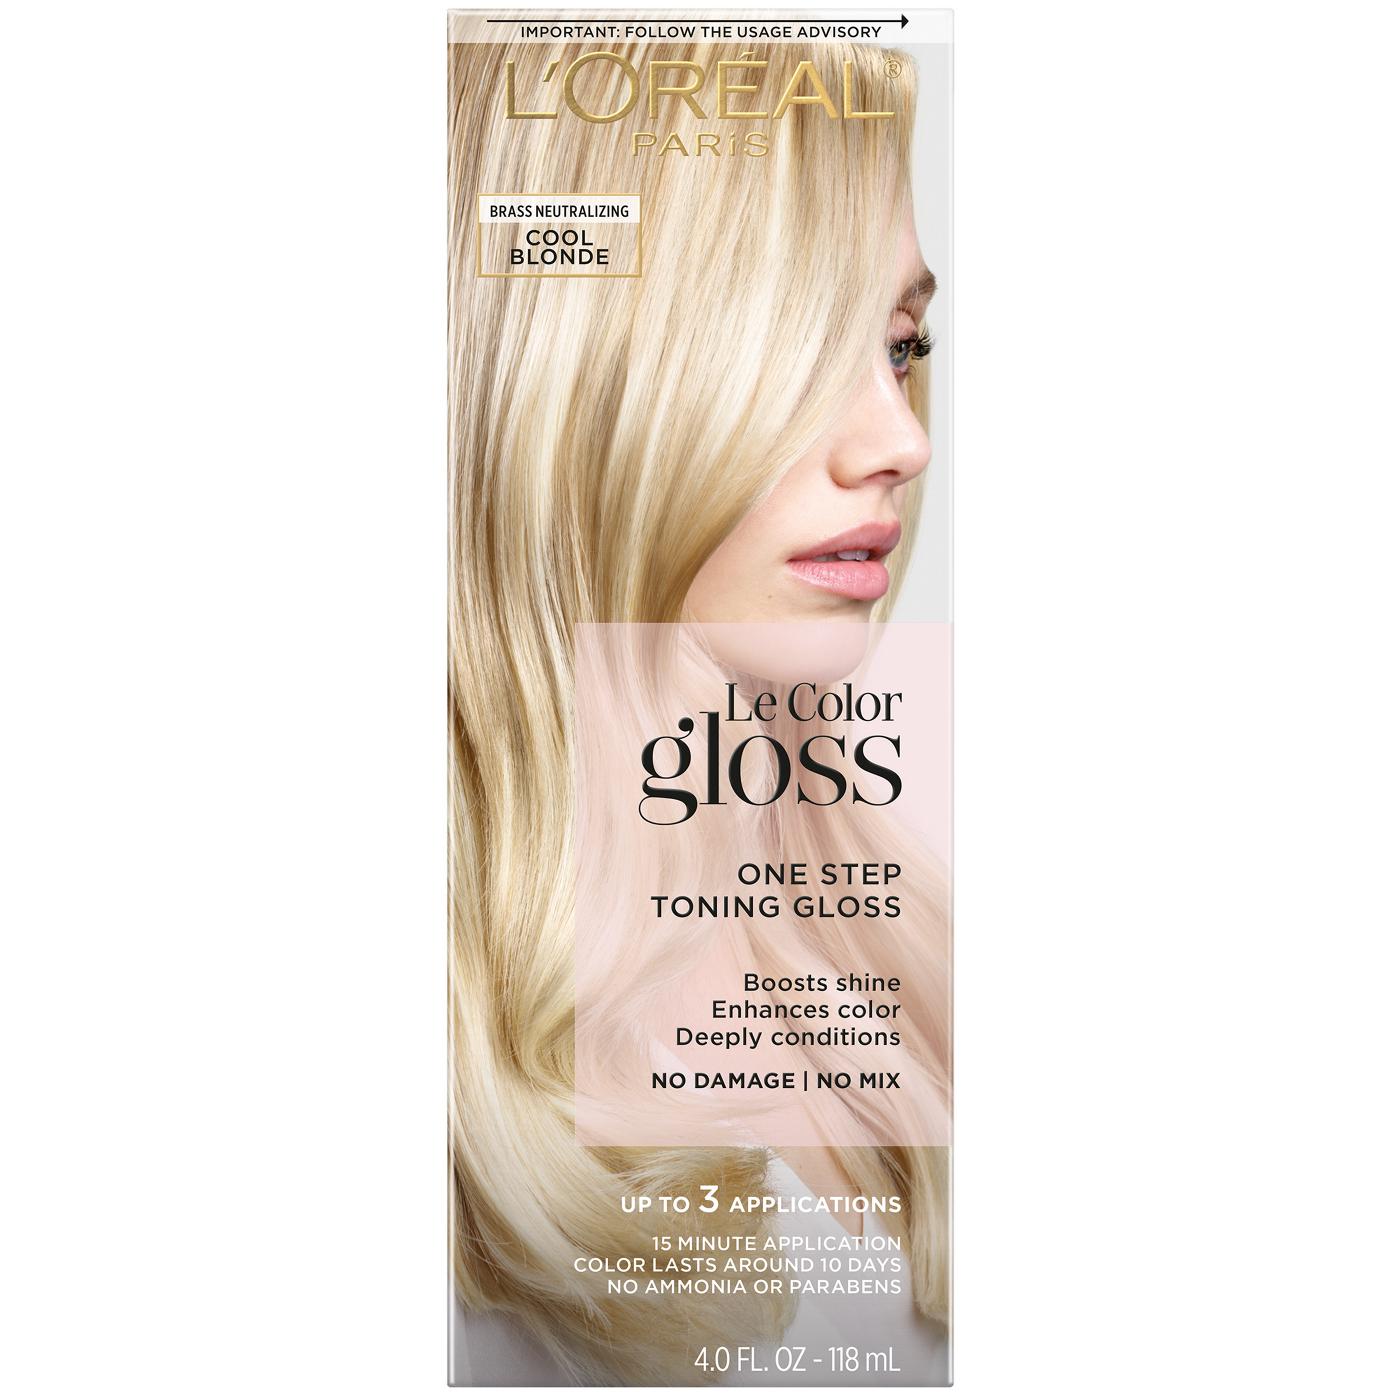 L'Oréal Paris Le Color Gloss One Step Toning Gloss - Cool Blonde; image 1 of 4